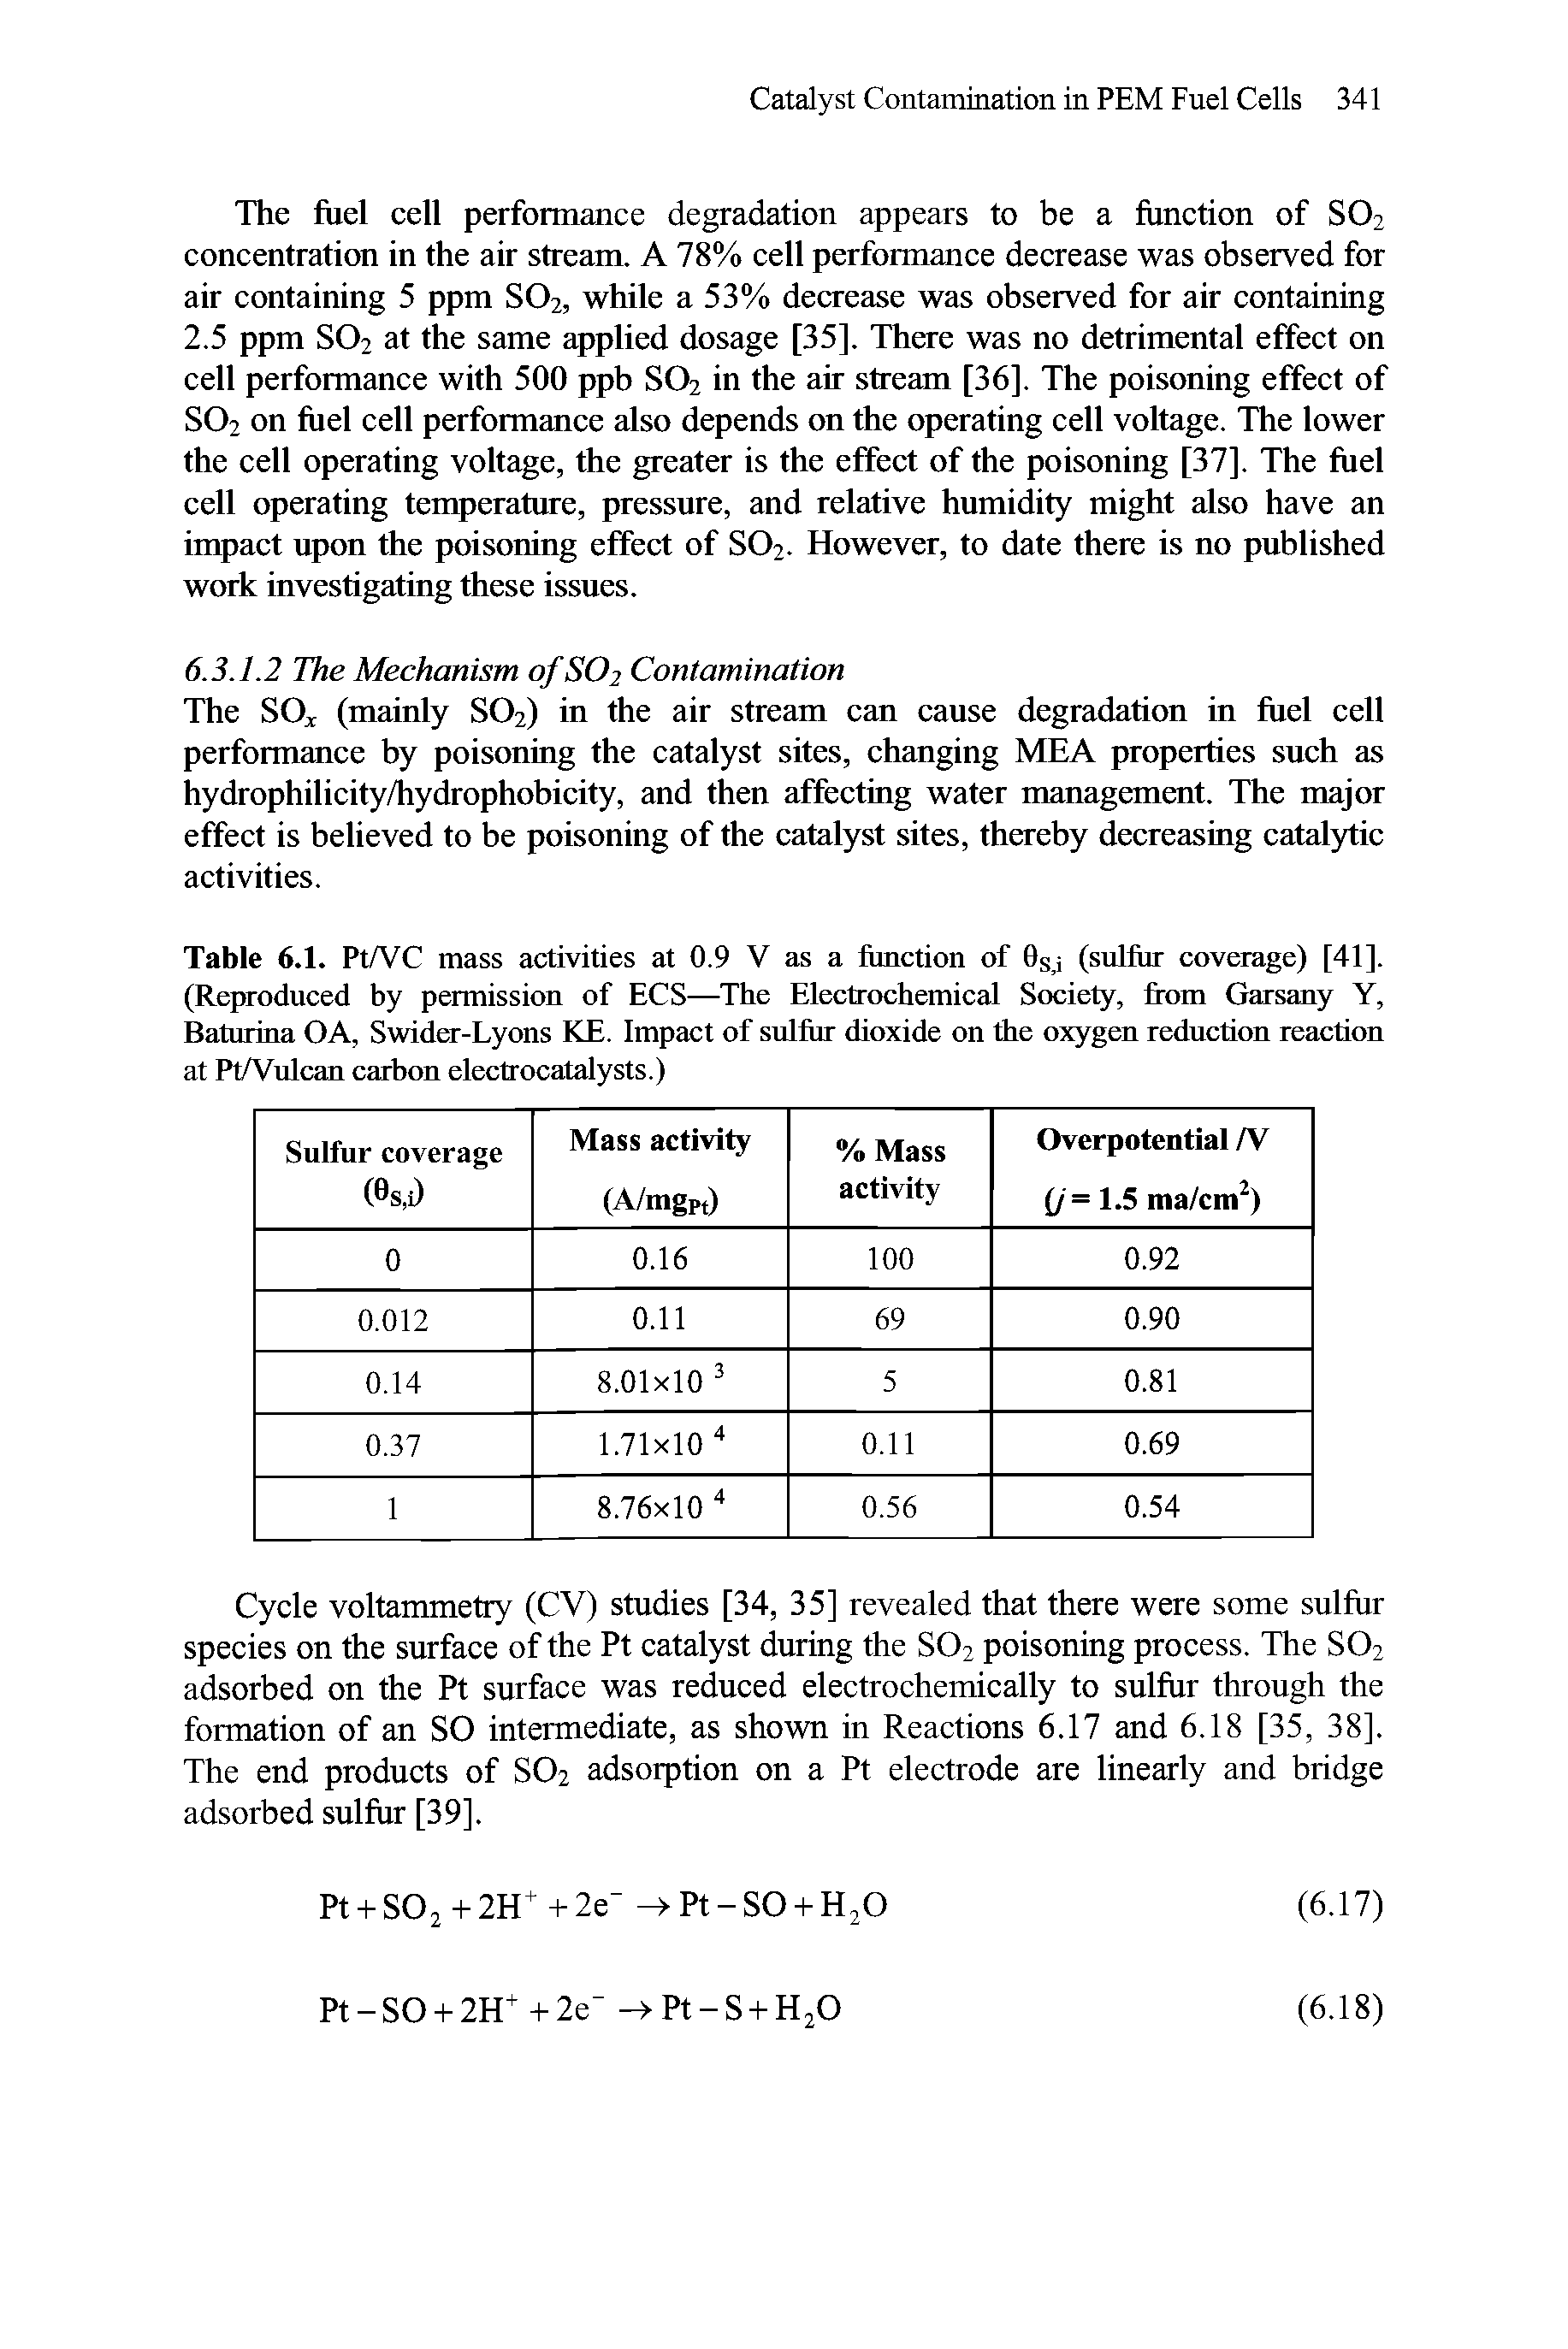 Table 6.1. Pt/VC mass activities at 0.9 V as a function of 0s,i (sulfur coverage) [41]. (Reproduced by permission of ECS—The Electrochemical Society, from Garsany Y, Baturina OA, Swider-Lyons KE. Impact of sulfur dioxide on the oxygen reduction reaction at IhA ulcan carbon electrocatalysts.)...